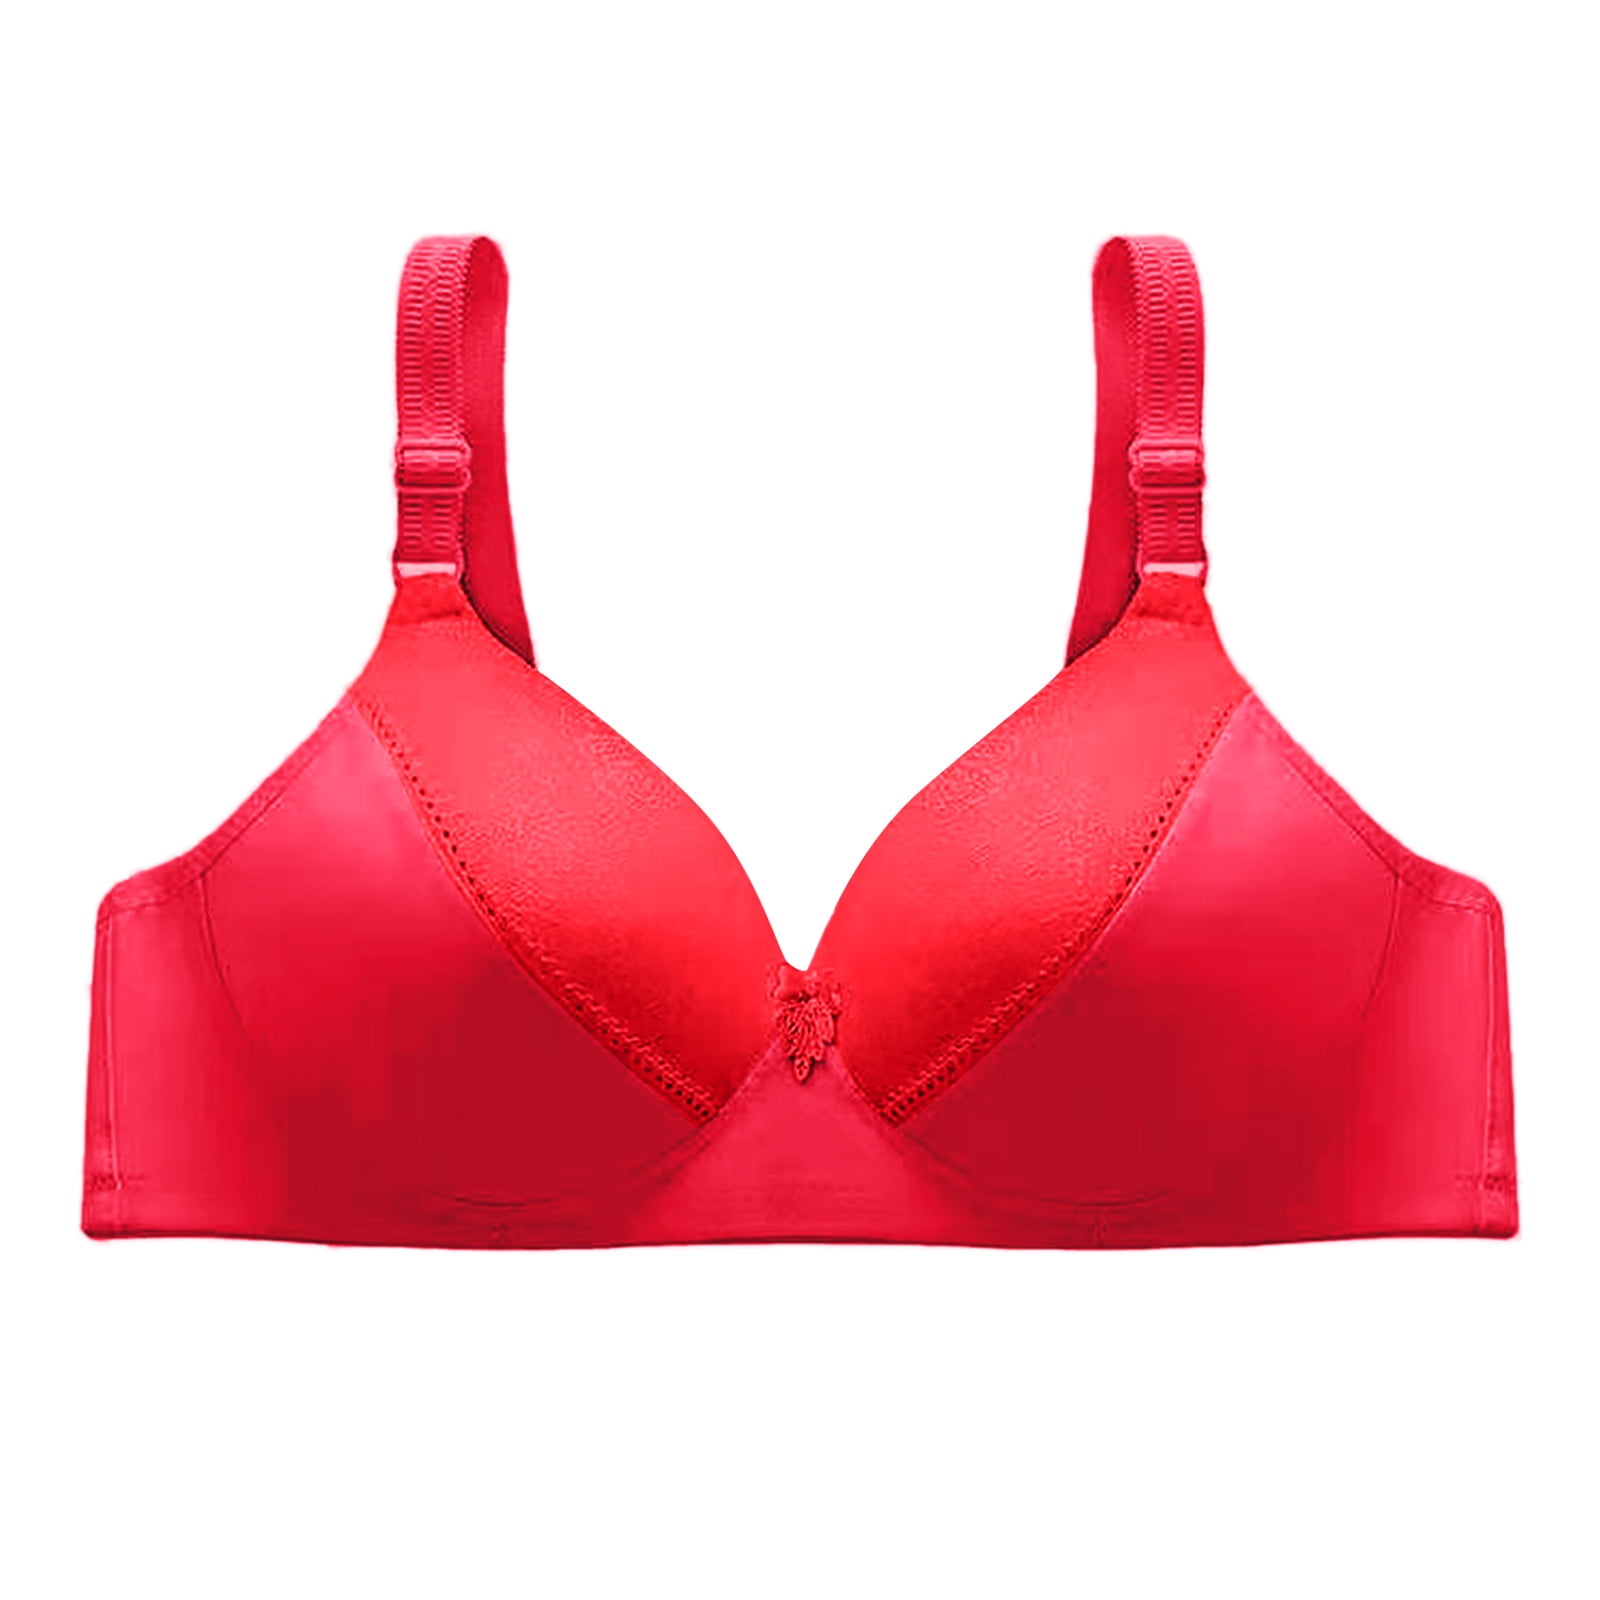 LEEy-World Lingerie for Women Plus Size Women's Filifit Sculpting Uplift  Bra Fashion Deep Cup Bra Full Back Coverage Hide Smooth Bra Red,42